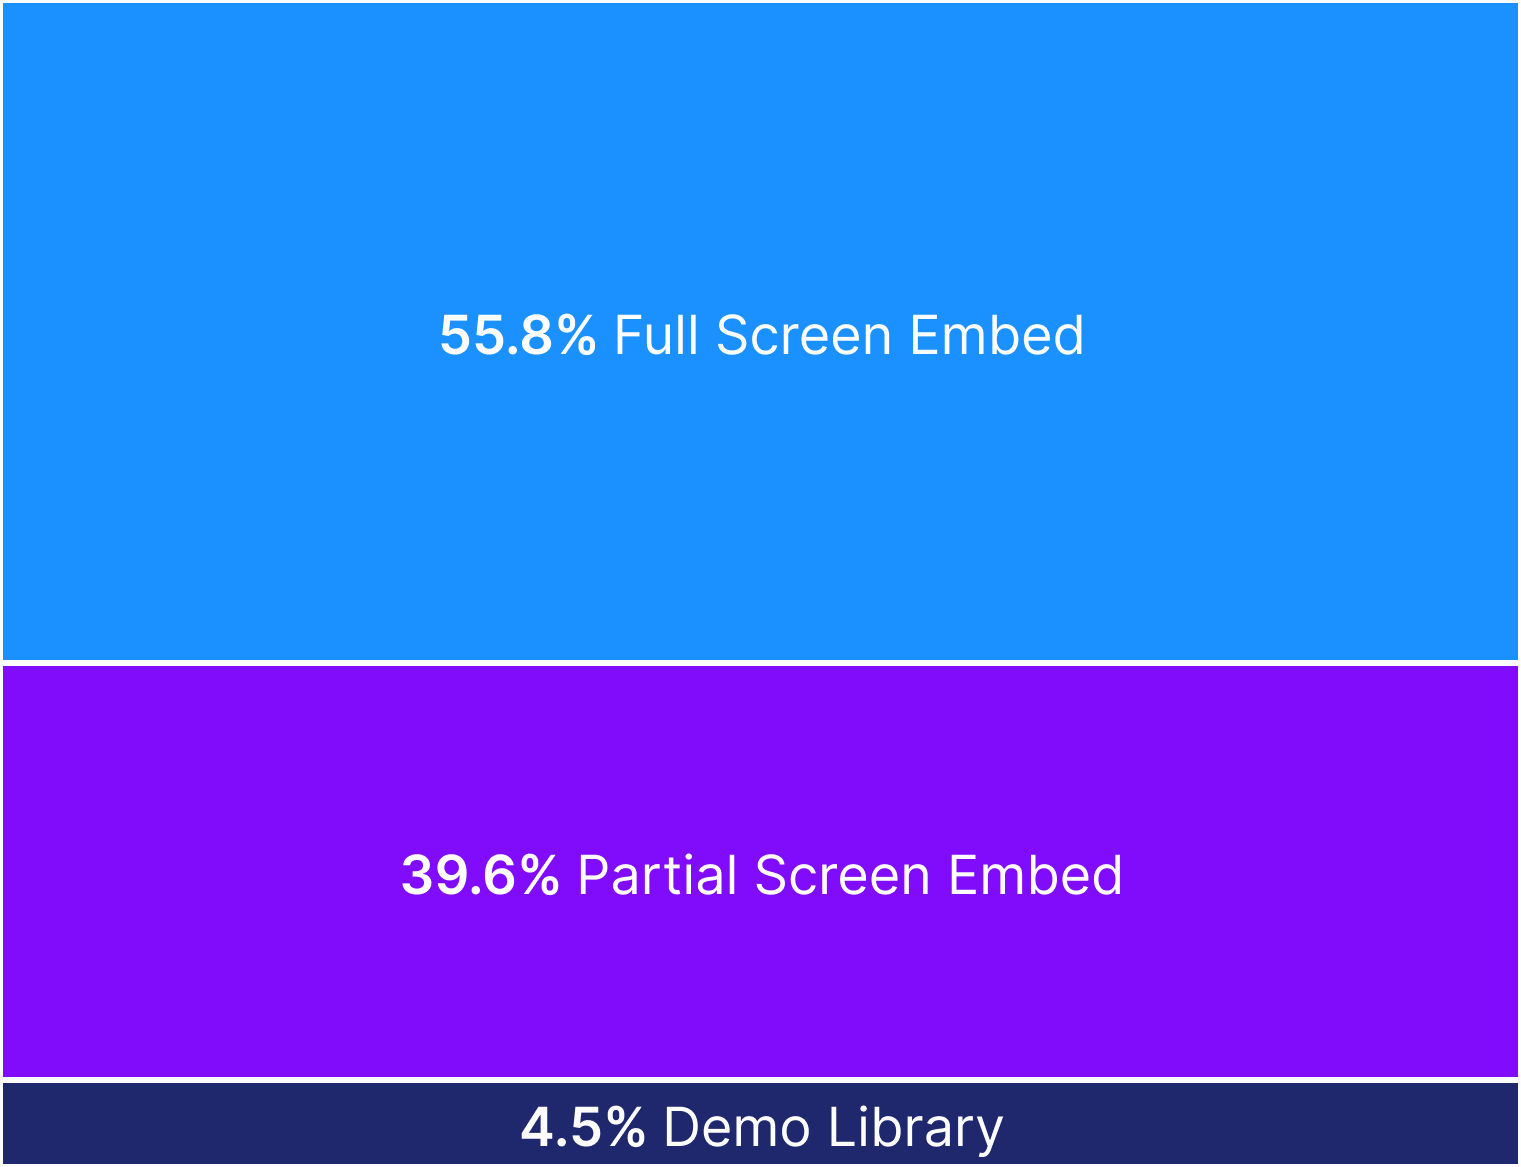 Top embed types for interactive demos